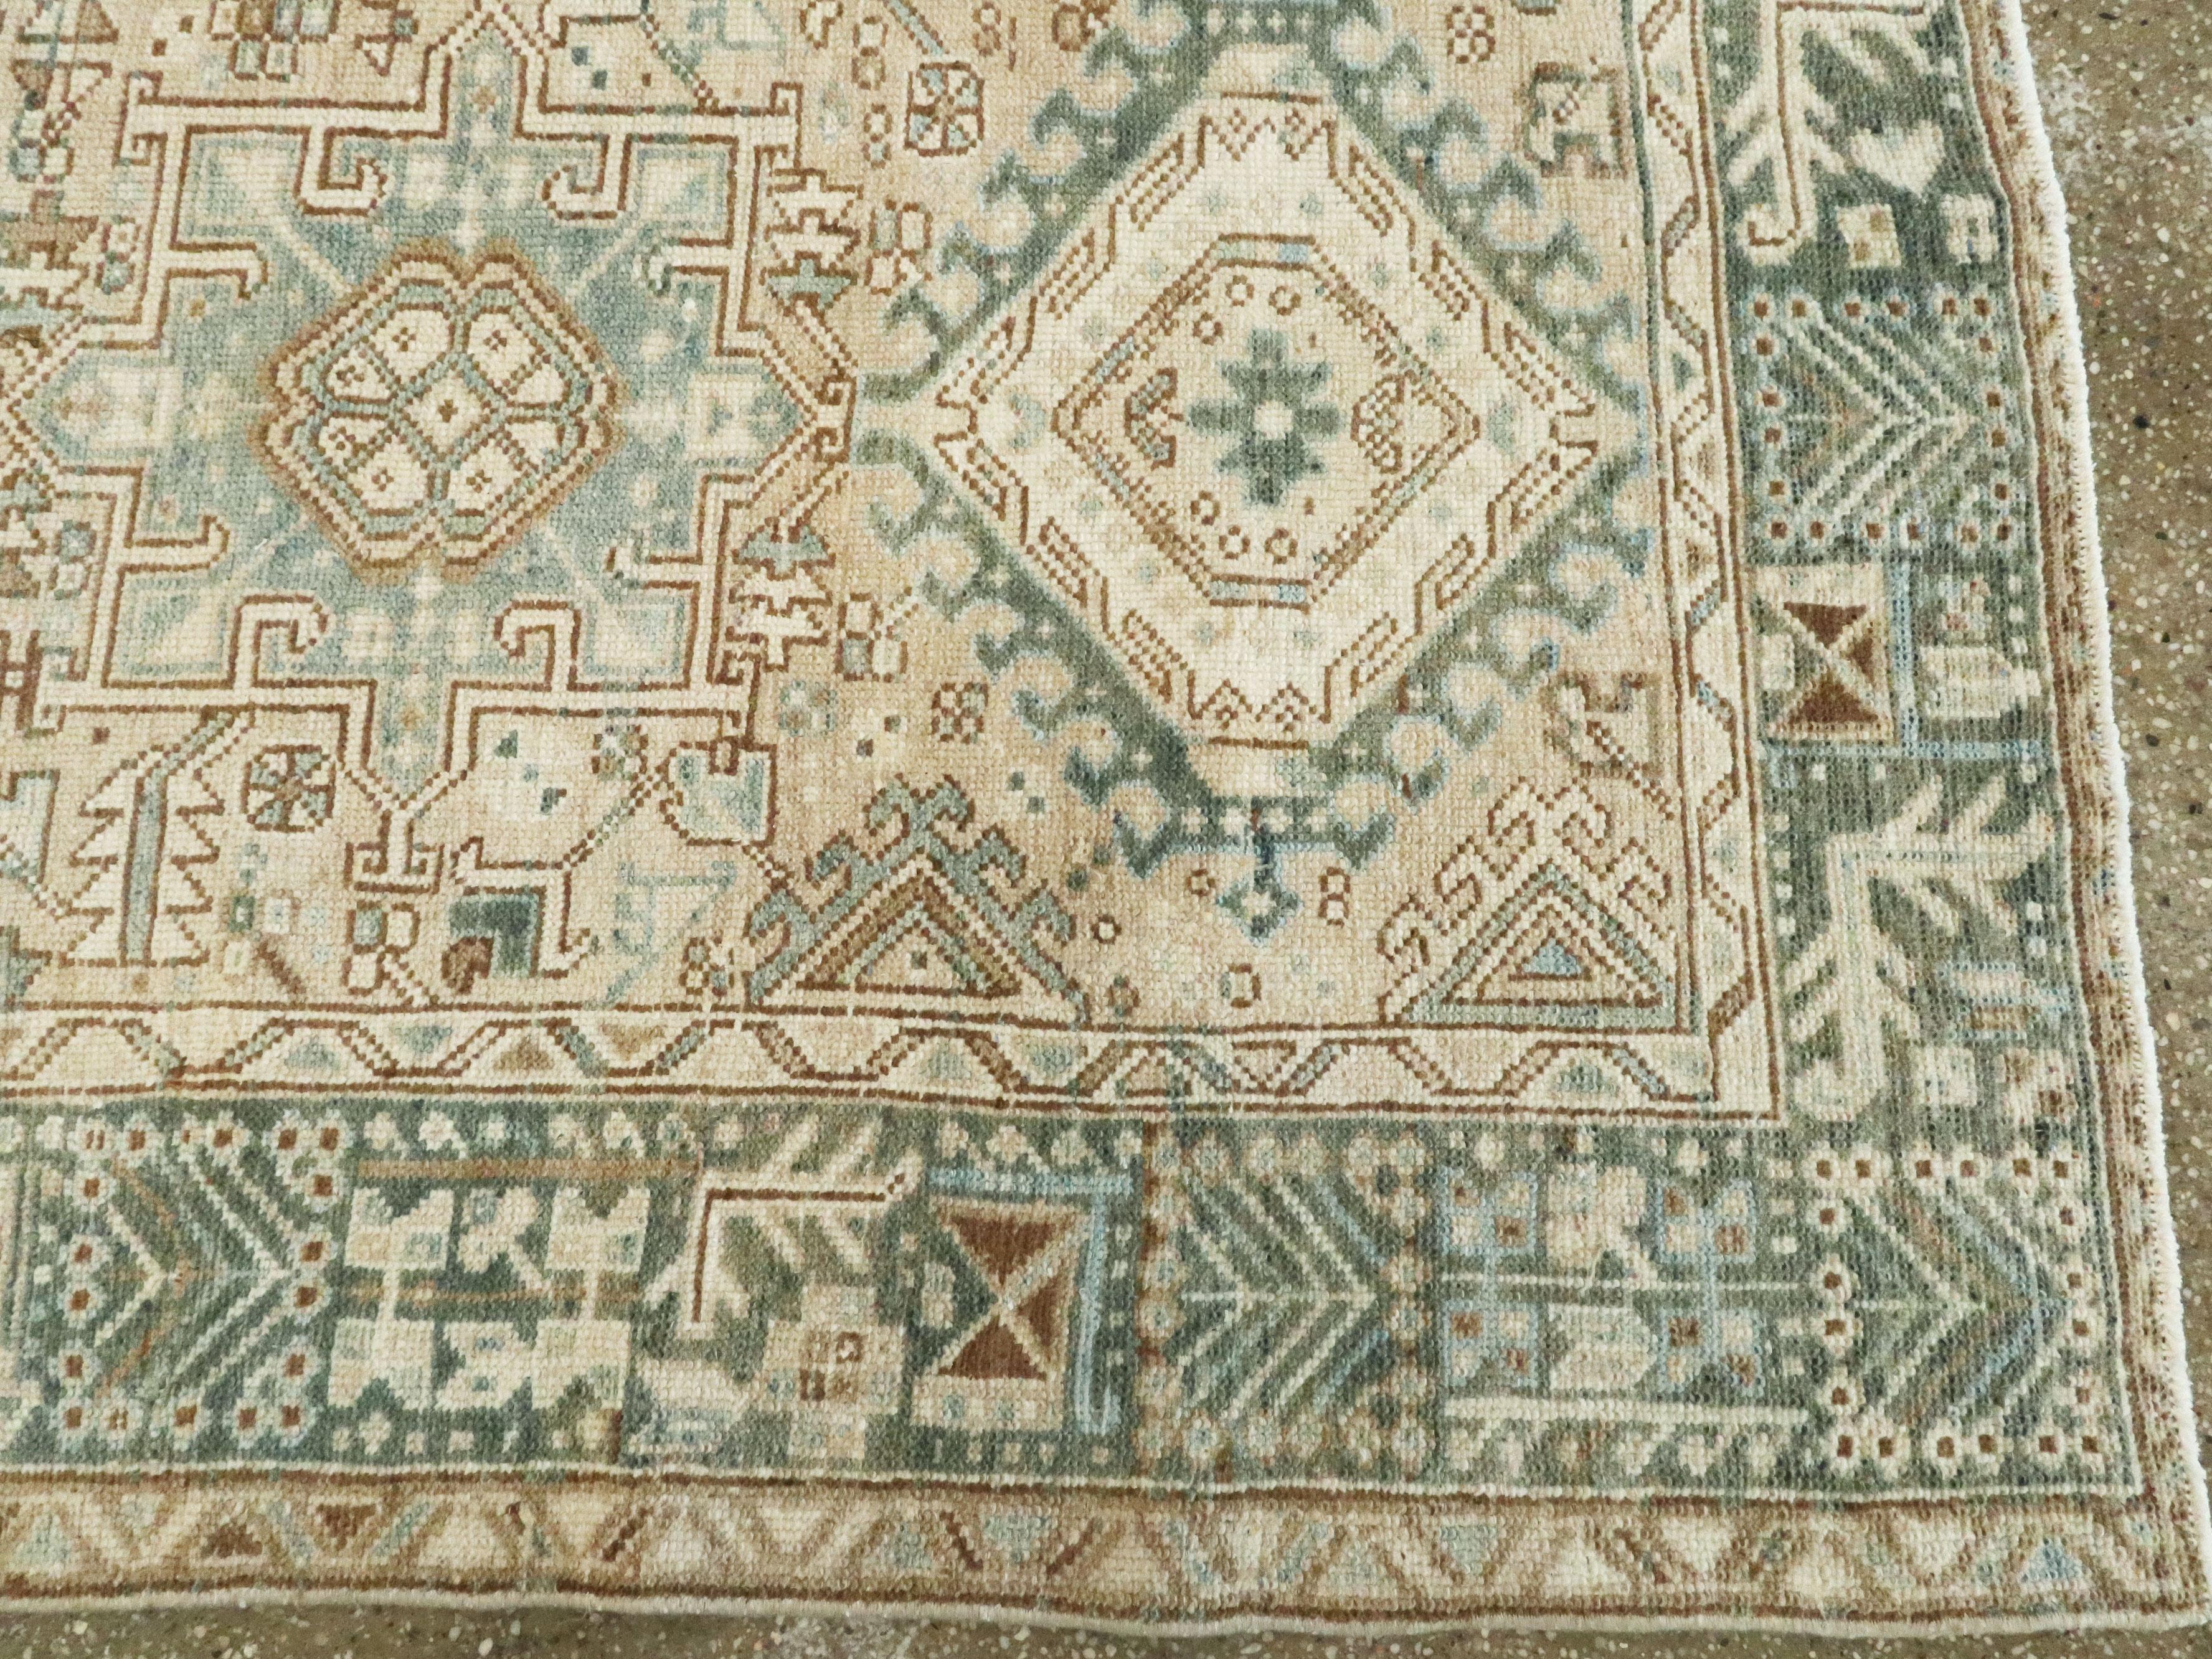 Mid-Century Persian Room Size Carpet With A Tribal Design In Teal and Sand Color 5